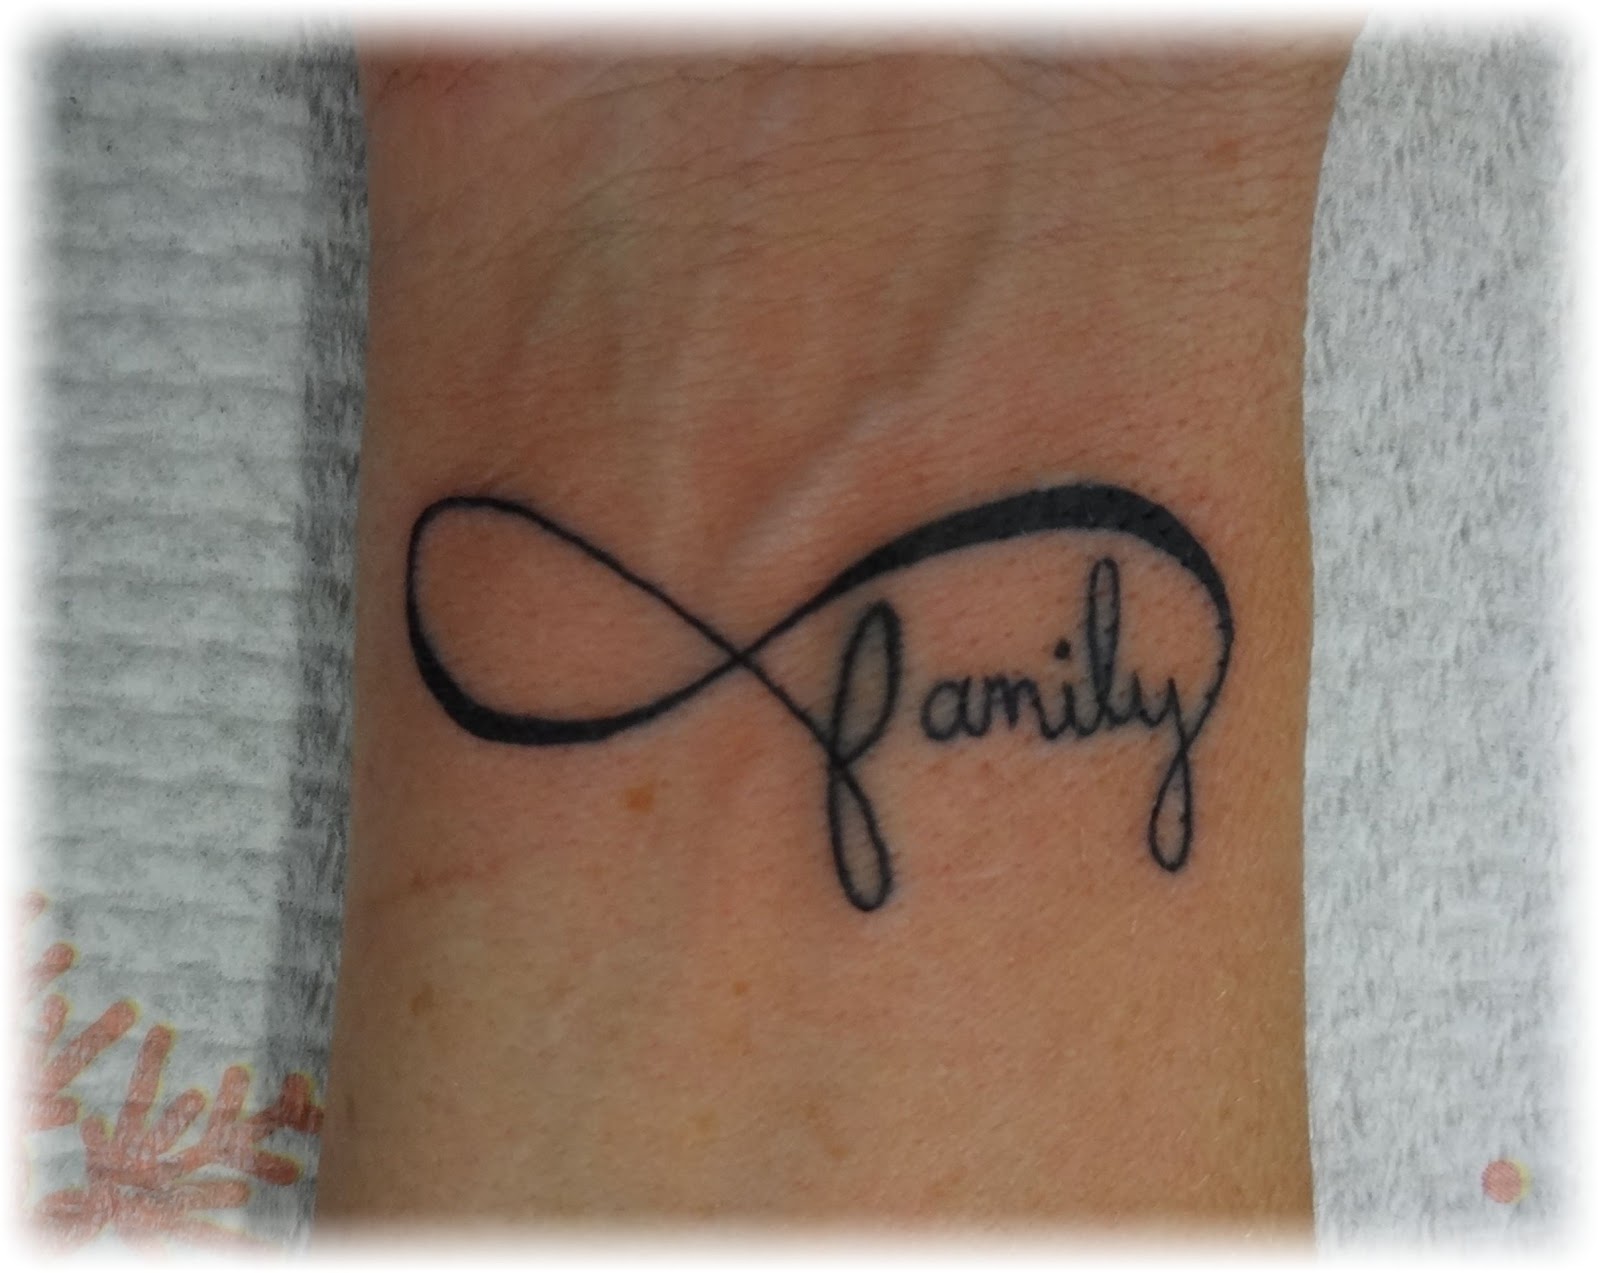 8. "Infinity Family Tattoo on Side of Hand" - wide 2